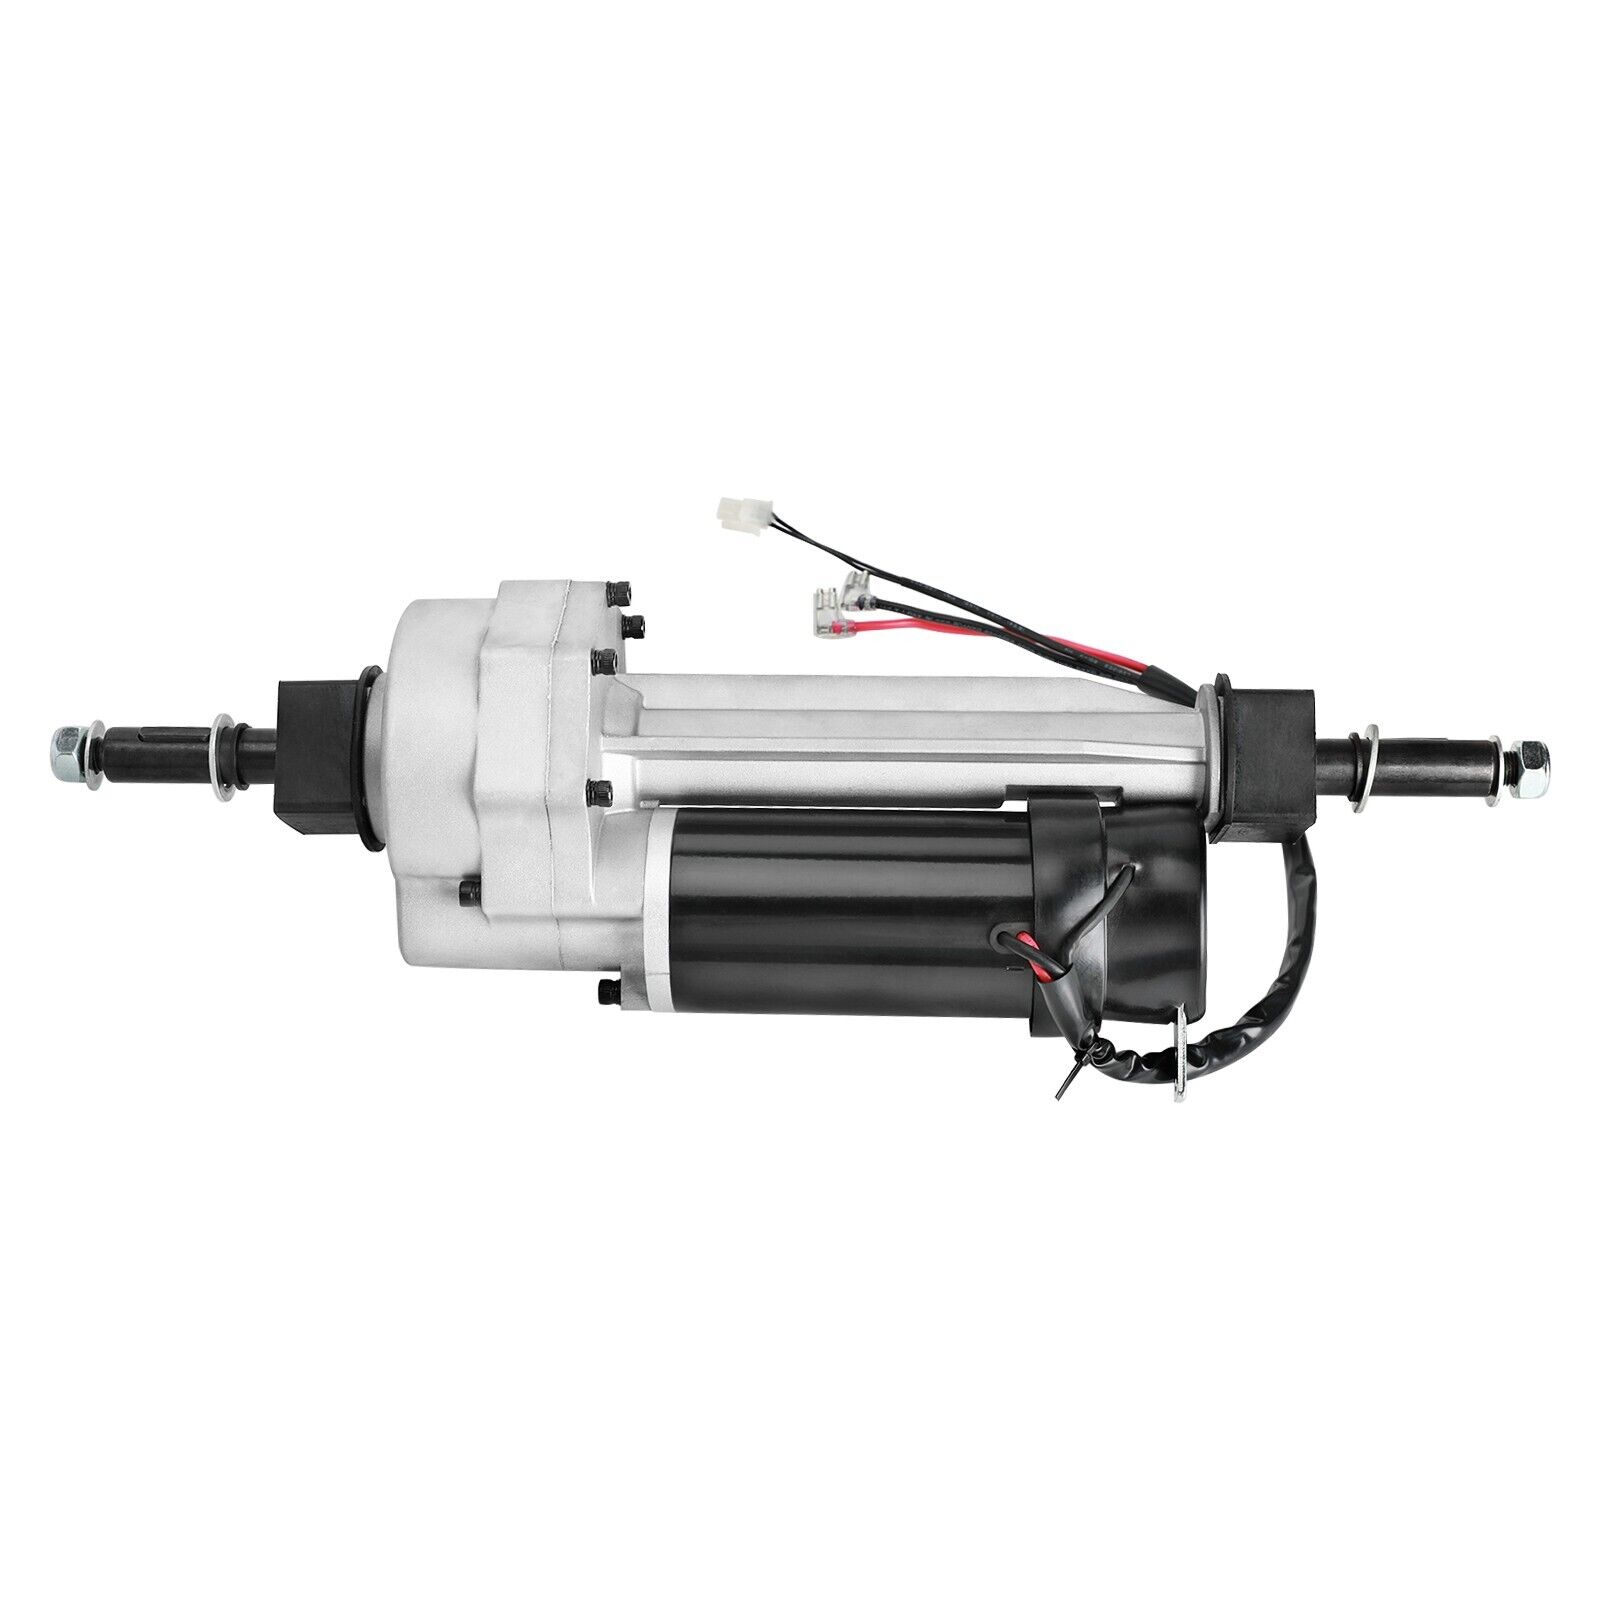 Electric DC Axle 24v 350W FOR Go cart Powerwheels Motor Transaxle Scooter Wagon